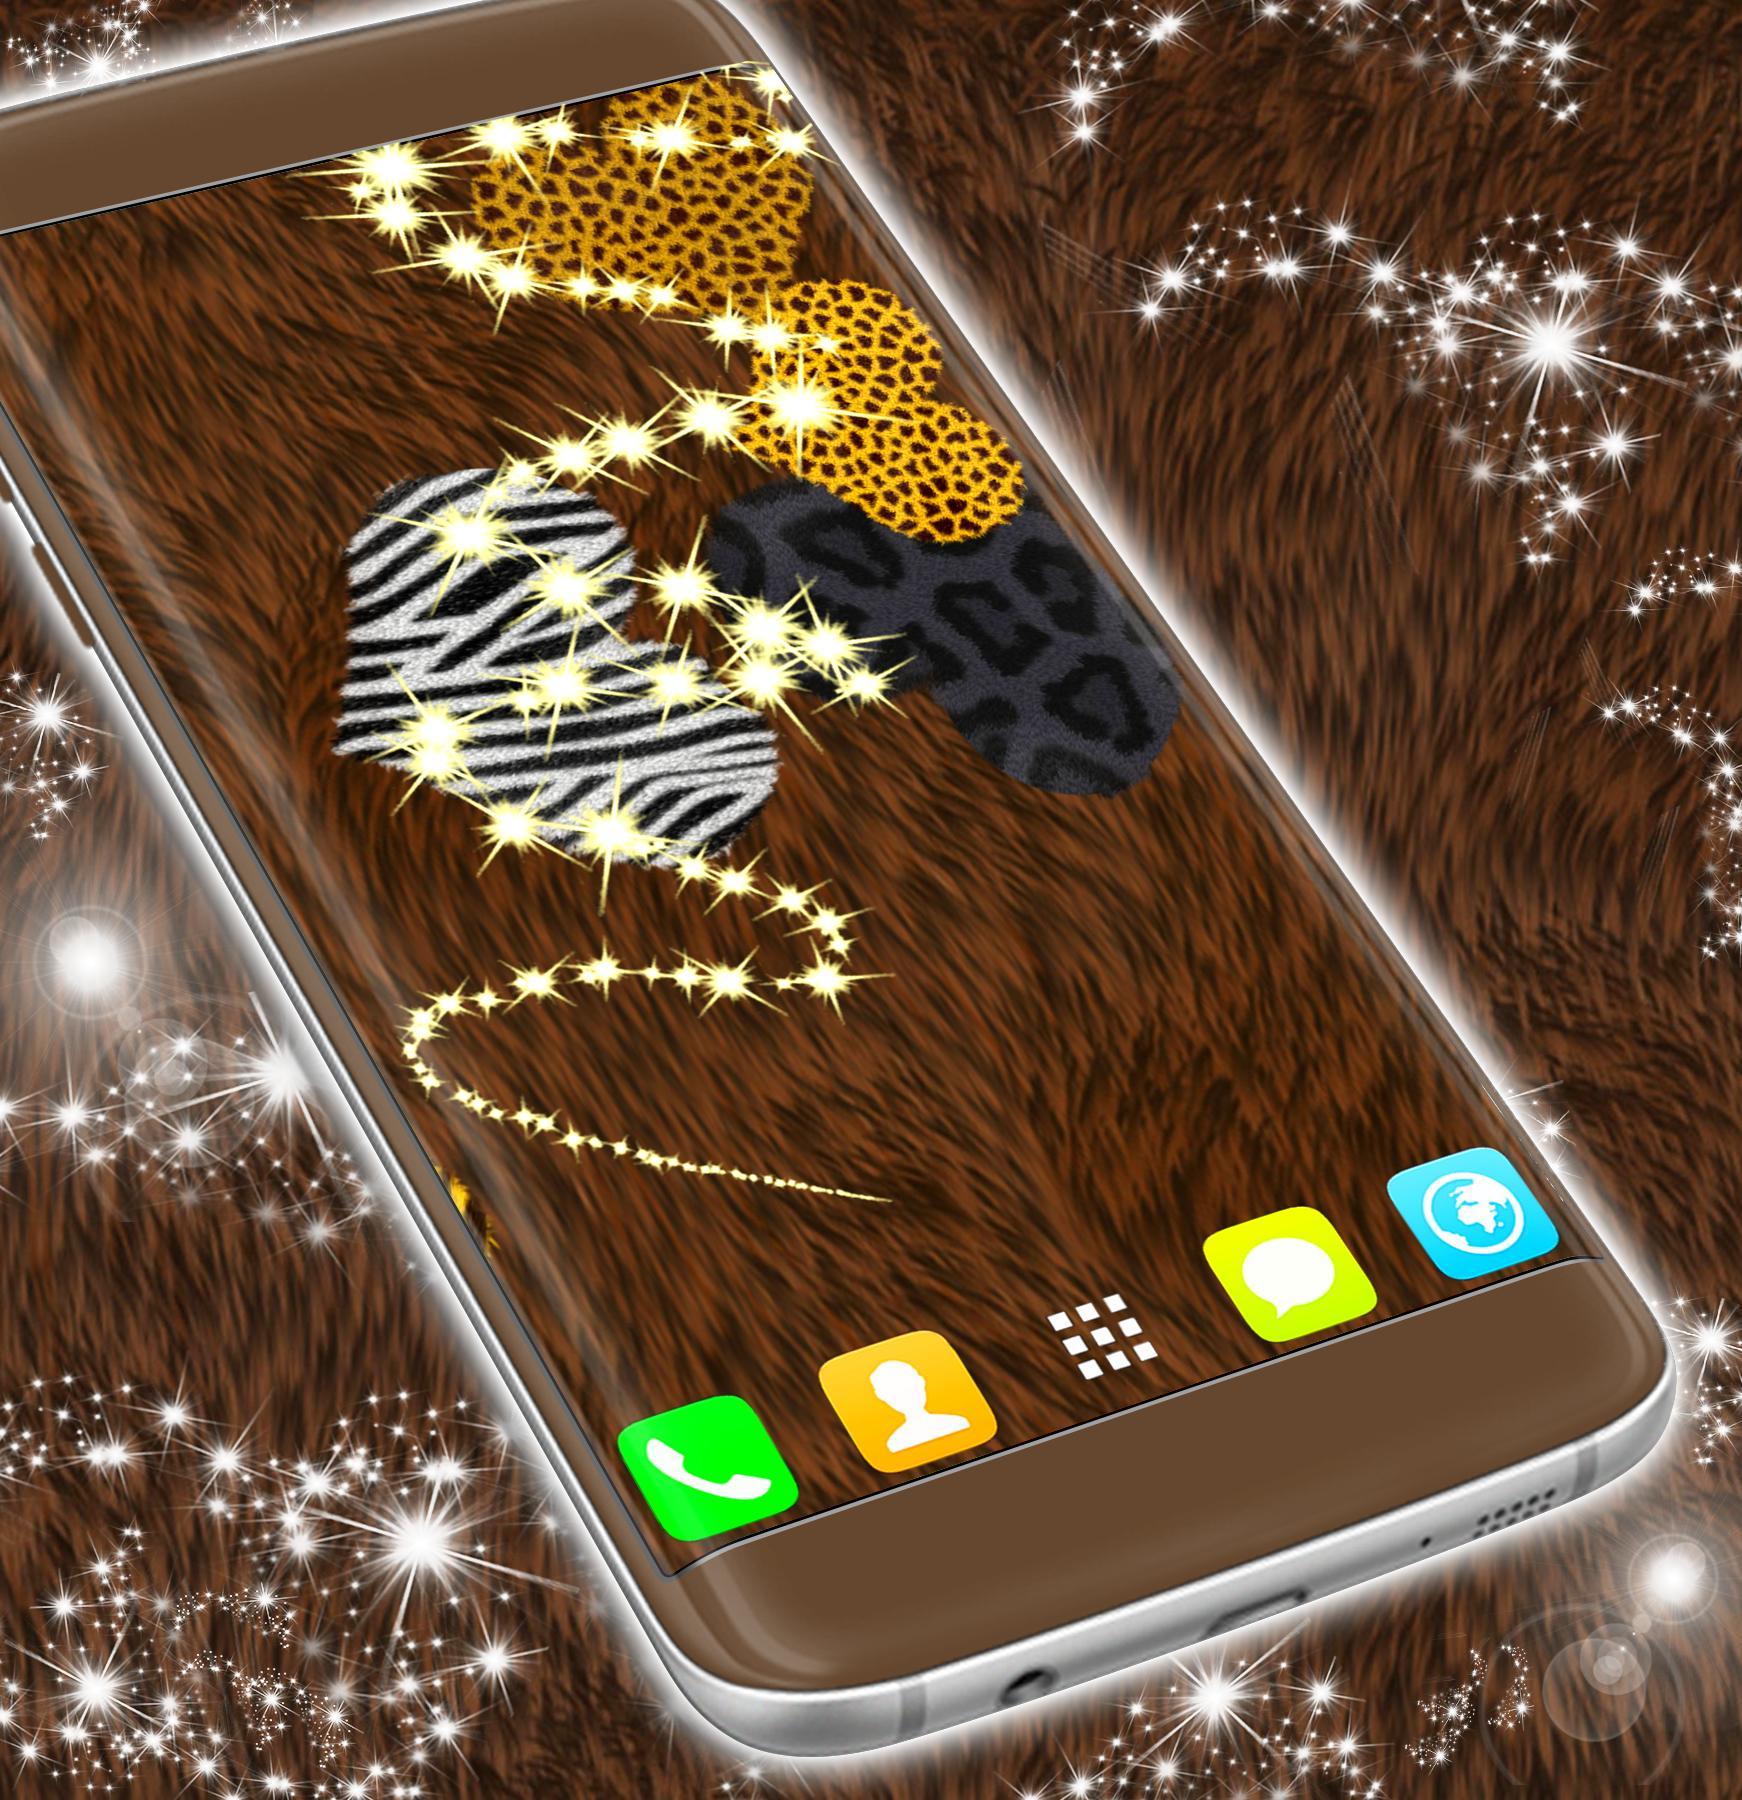 Furry Live Wallpaper Android. Furry Live Wallpaper.